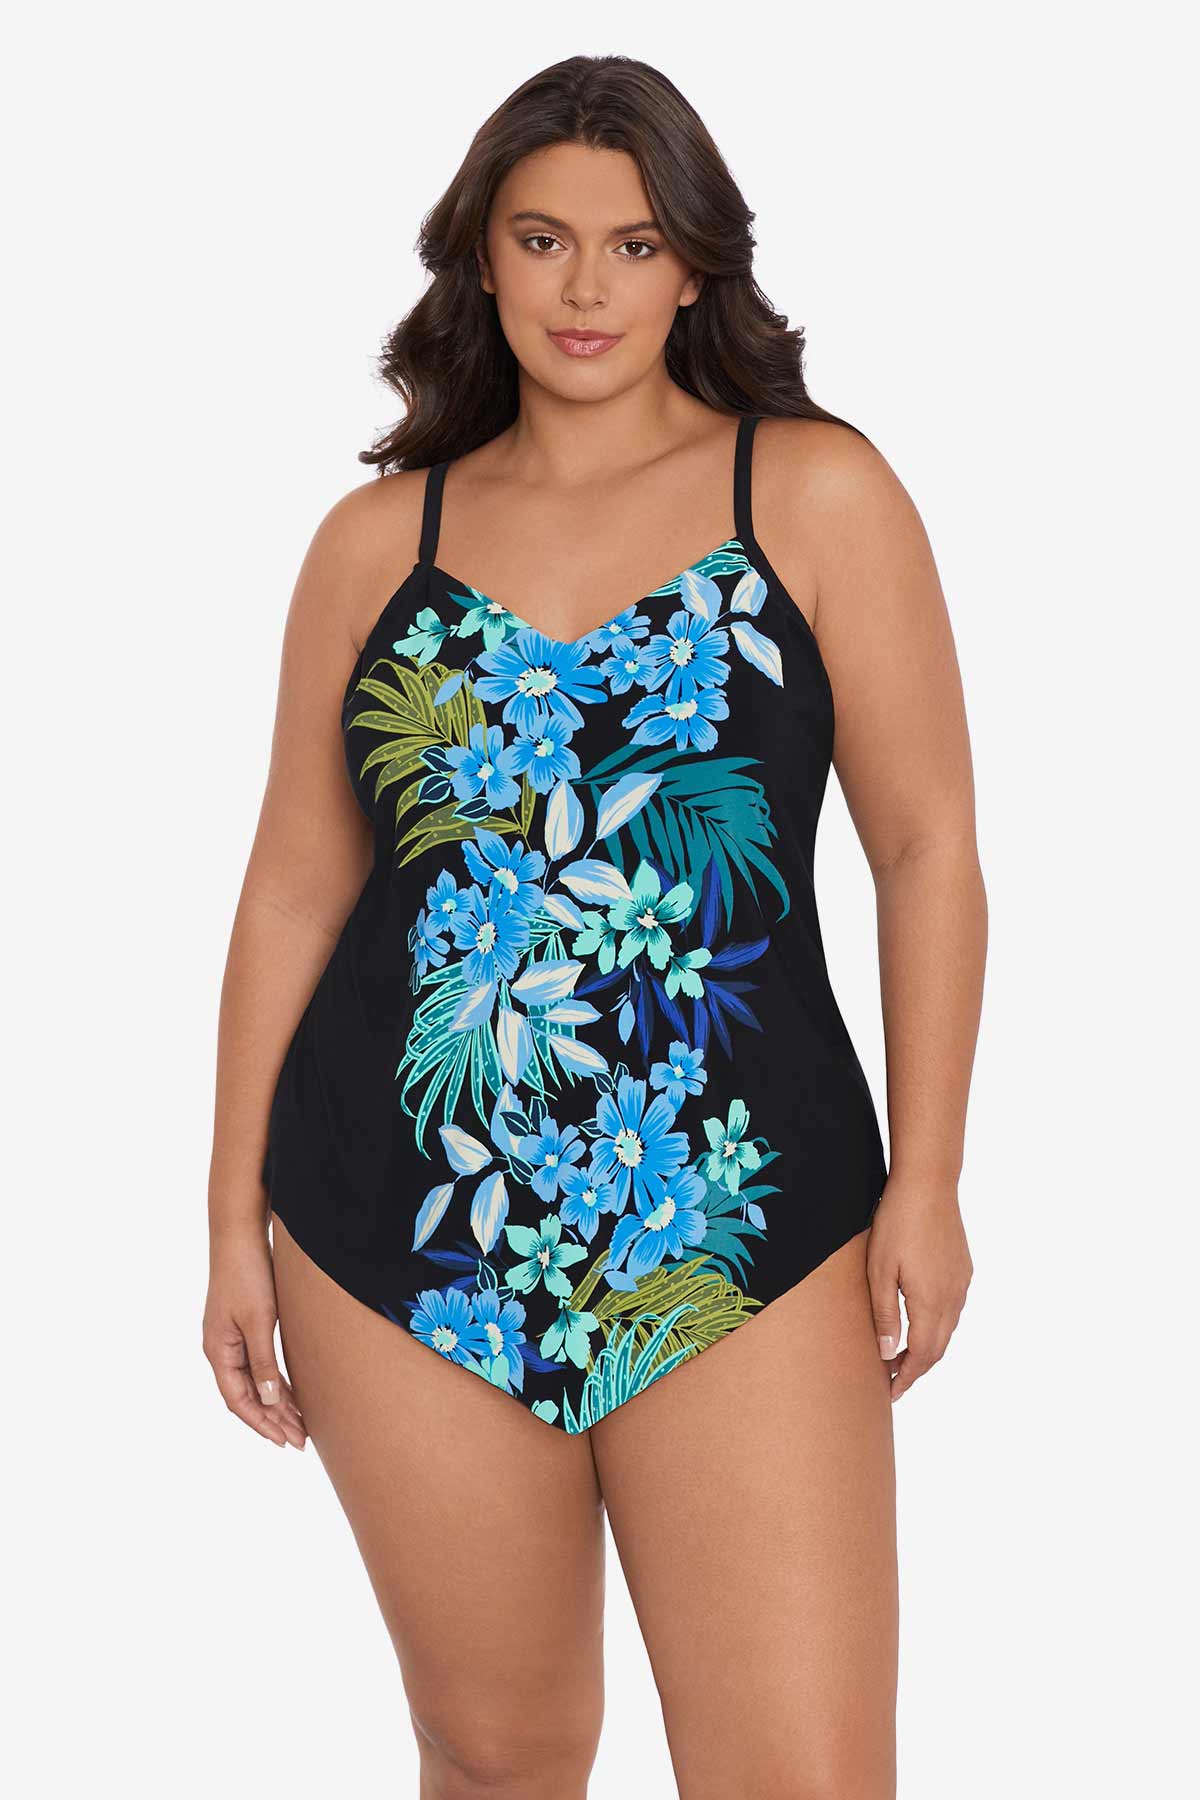 Infinite Swim: Where to Find Swimsuits in Sizes 32+ - It's time